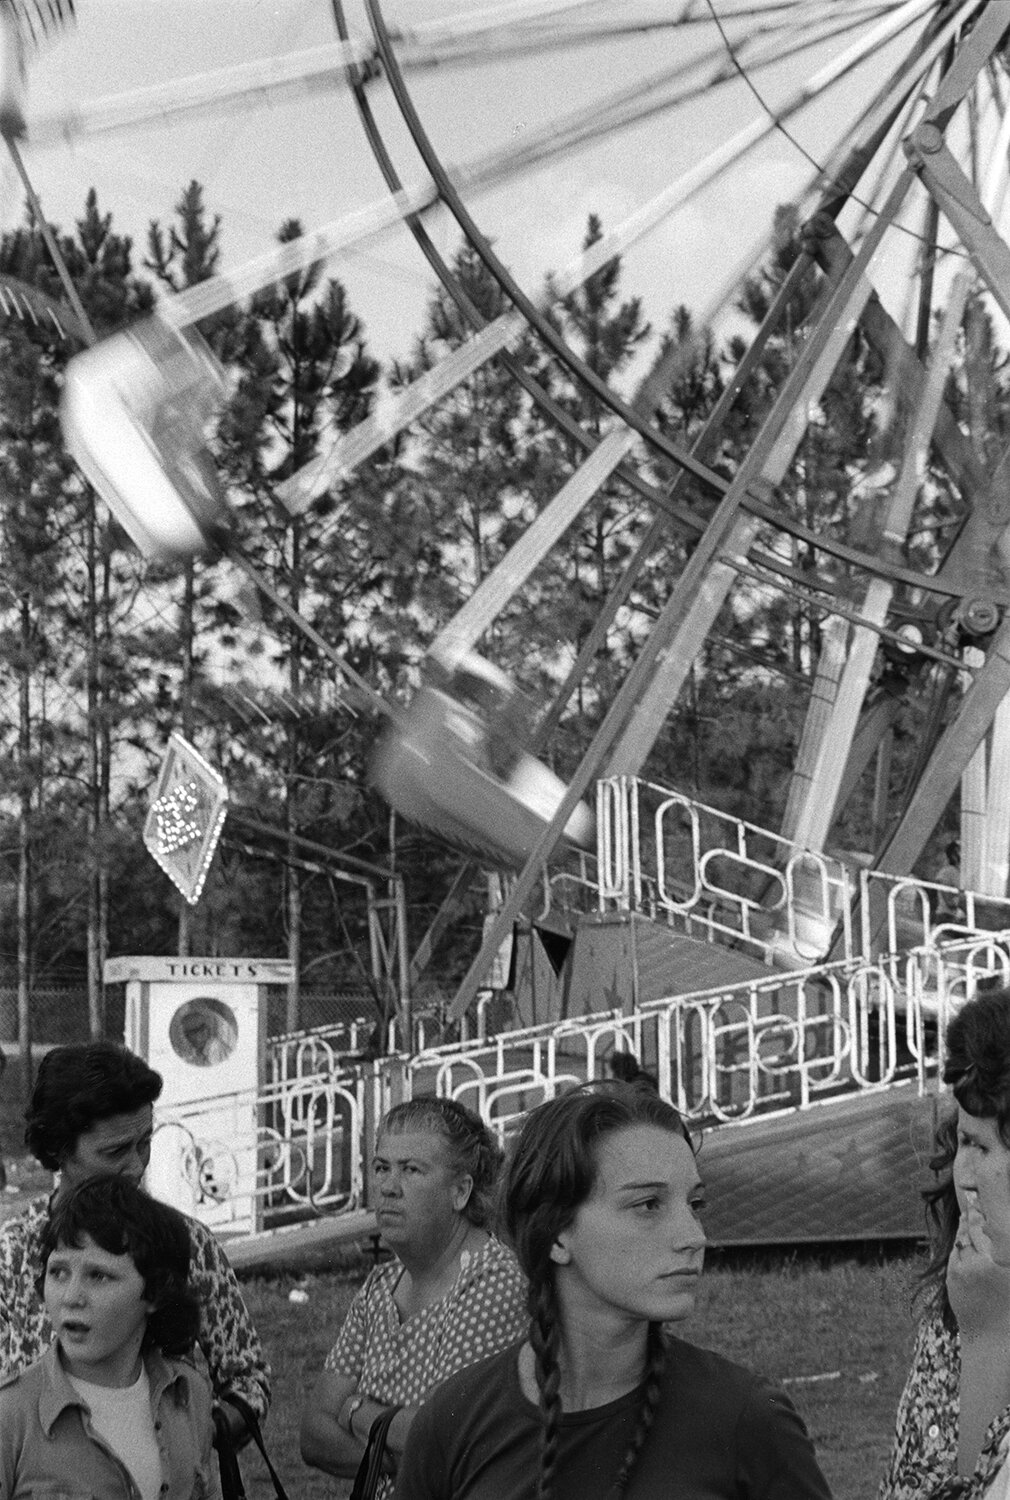   Decatur County Fair , 1977 Silver Gelatin Print 11 3/4 × 8 1/4 in. (image size) The Do Good Fund, Inc., 2017-054 